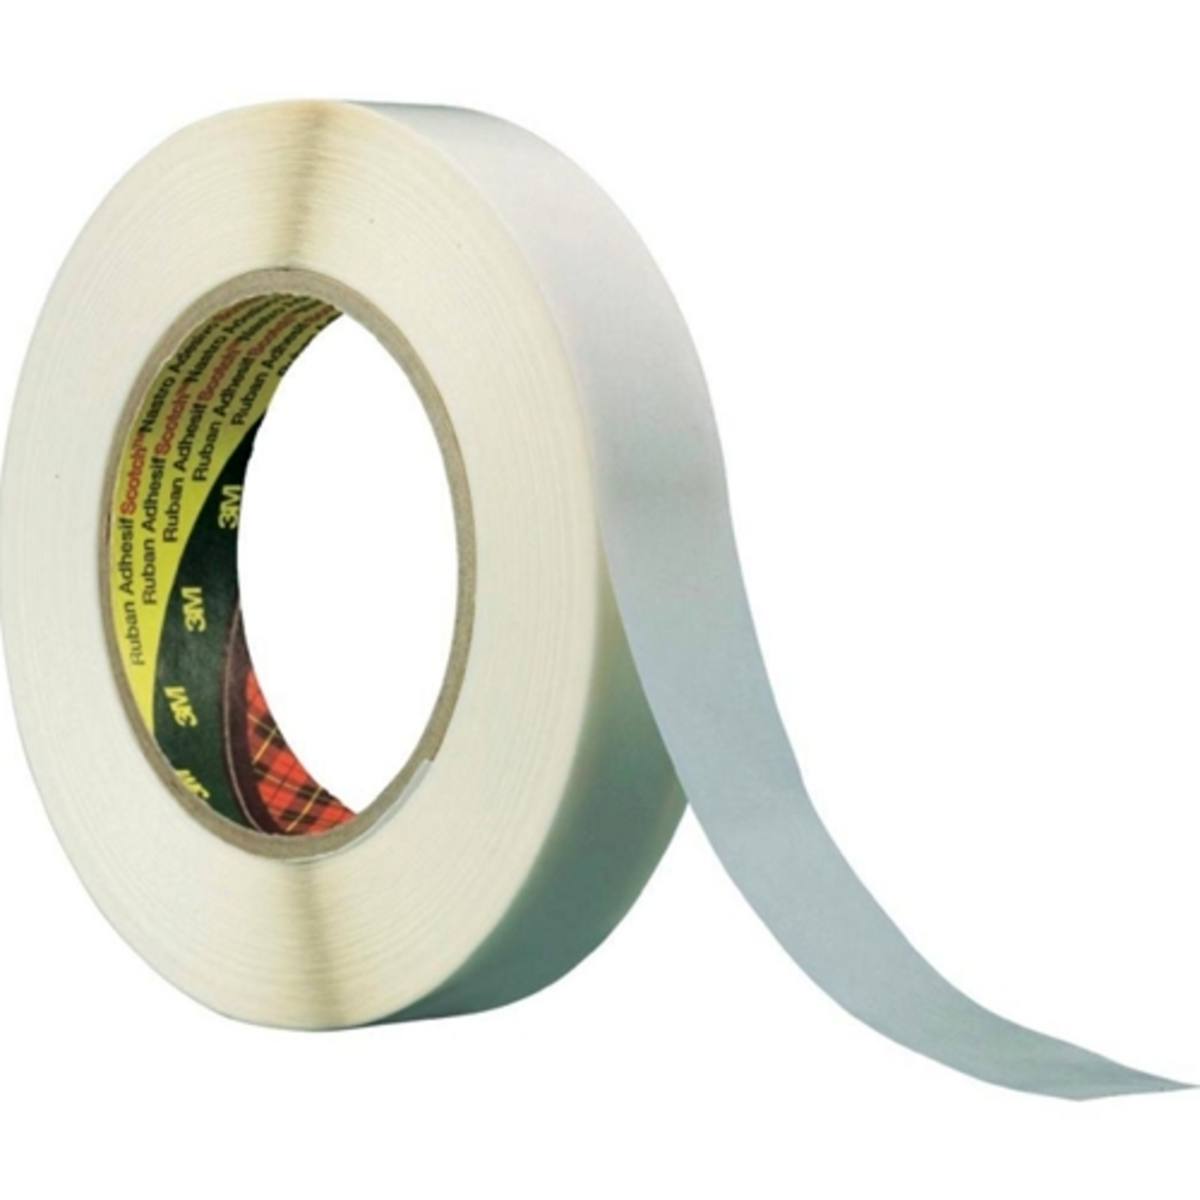 3M Double-sided adhesive tape with non-woven paper backing 9040, cream-colored, 25 mm x 50 m, 0.1 mm